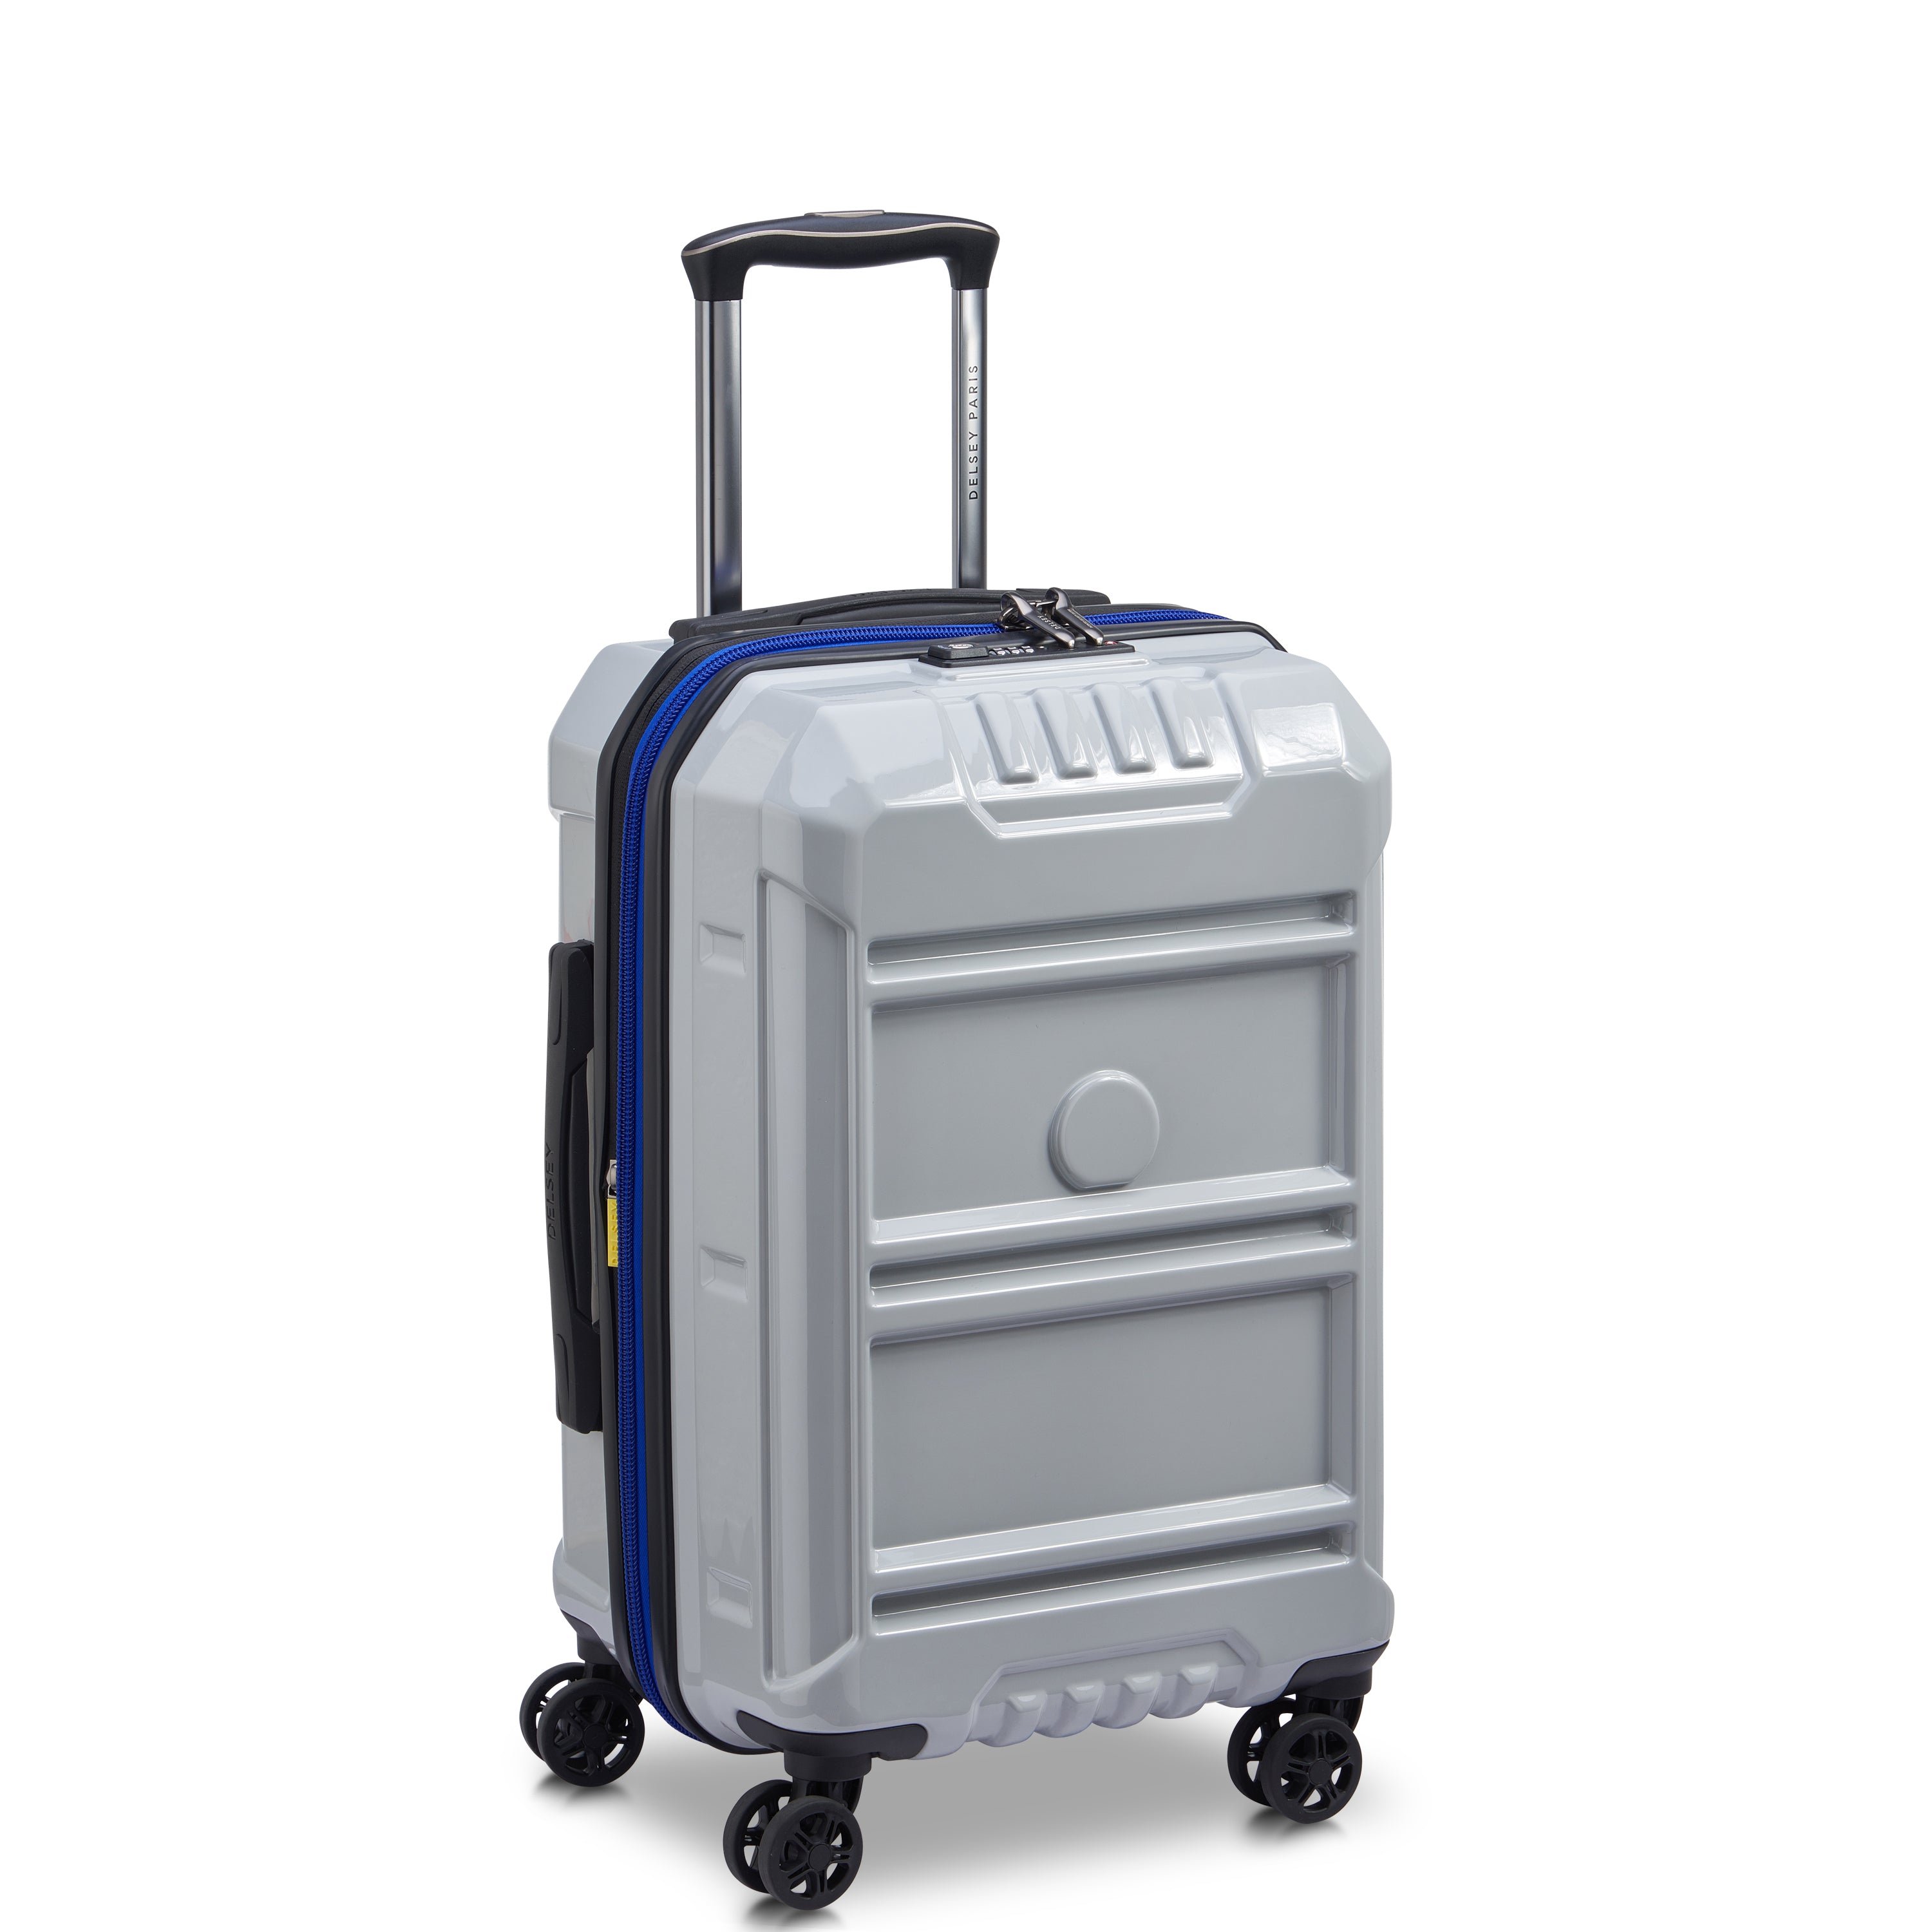 Delsey Rempart 55cm Hardcase Expandable 4 Double Wheel Flex Cabin Luggage Trolley Case Storm Grey Glossy - 218180121